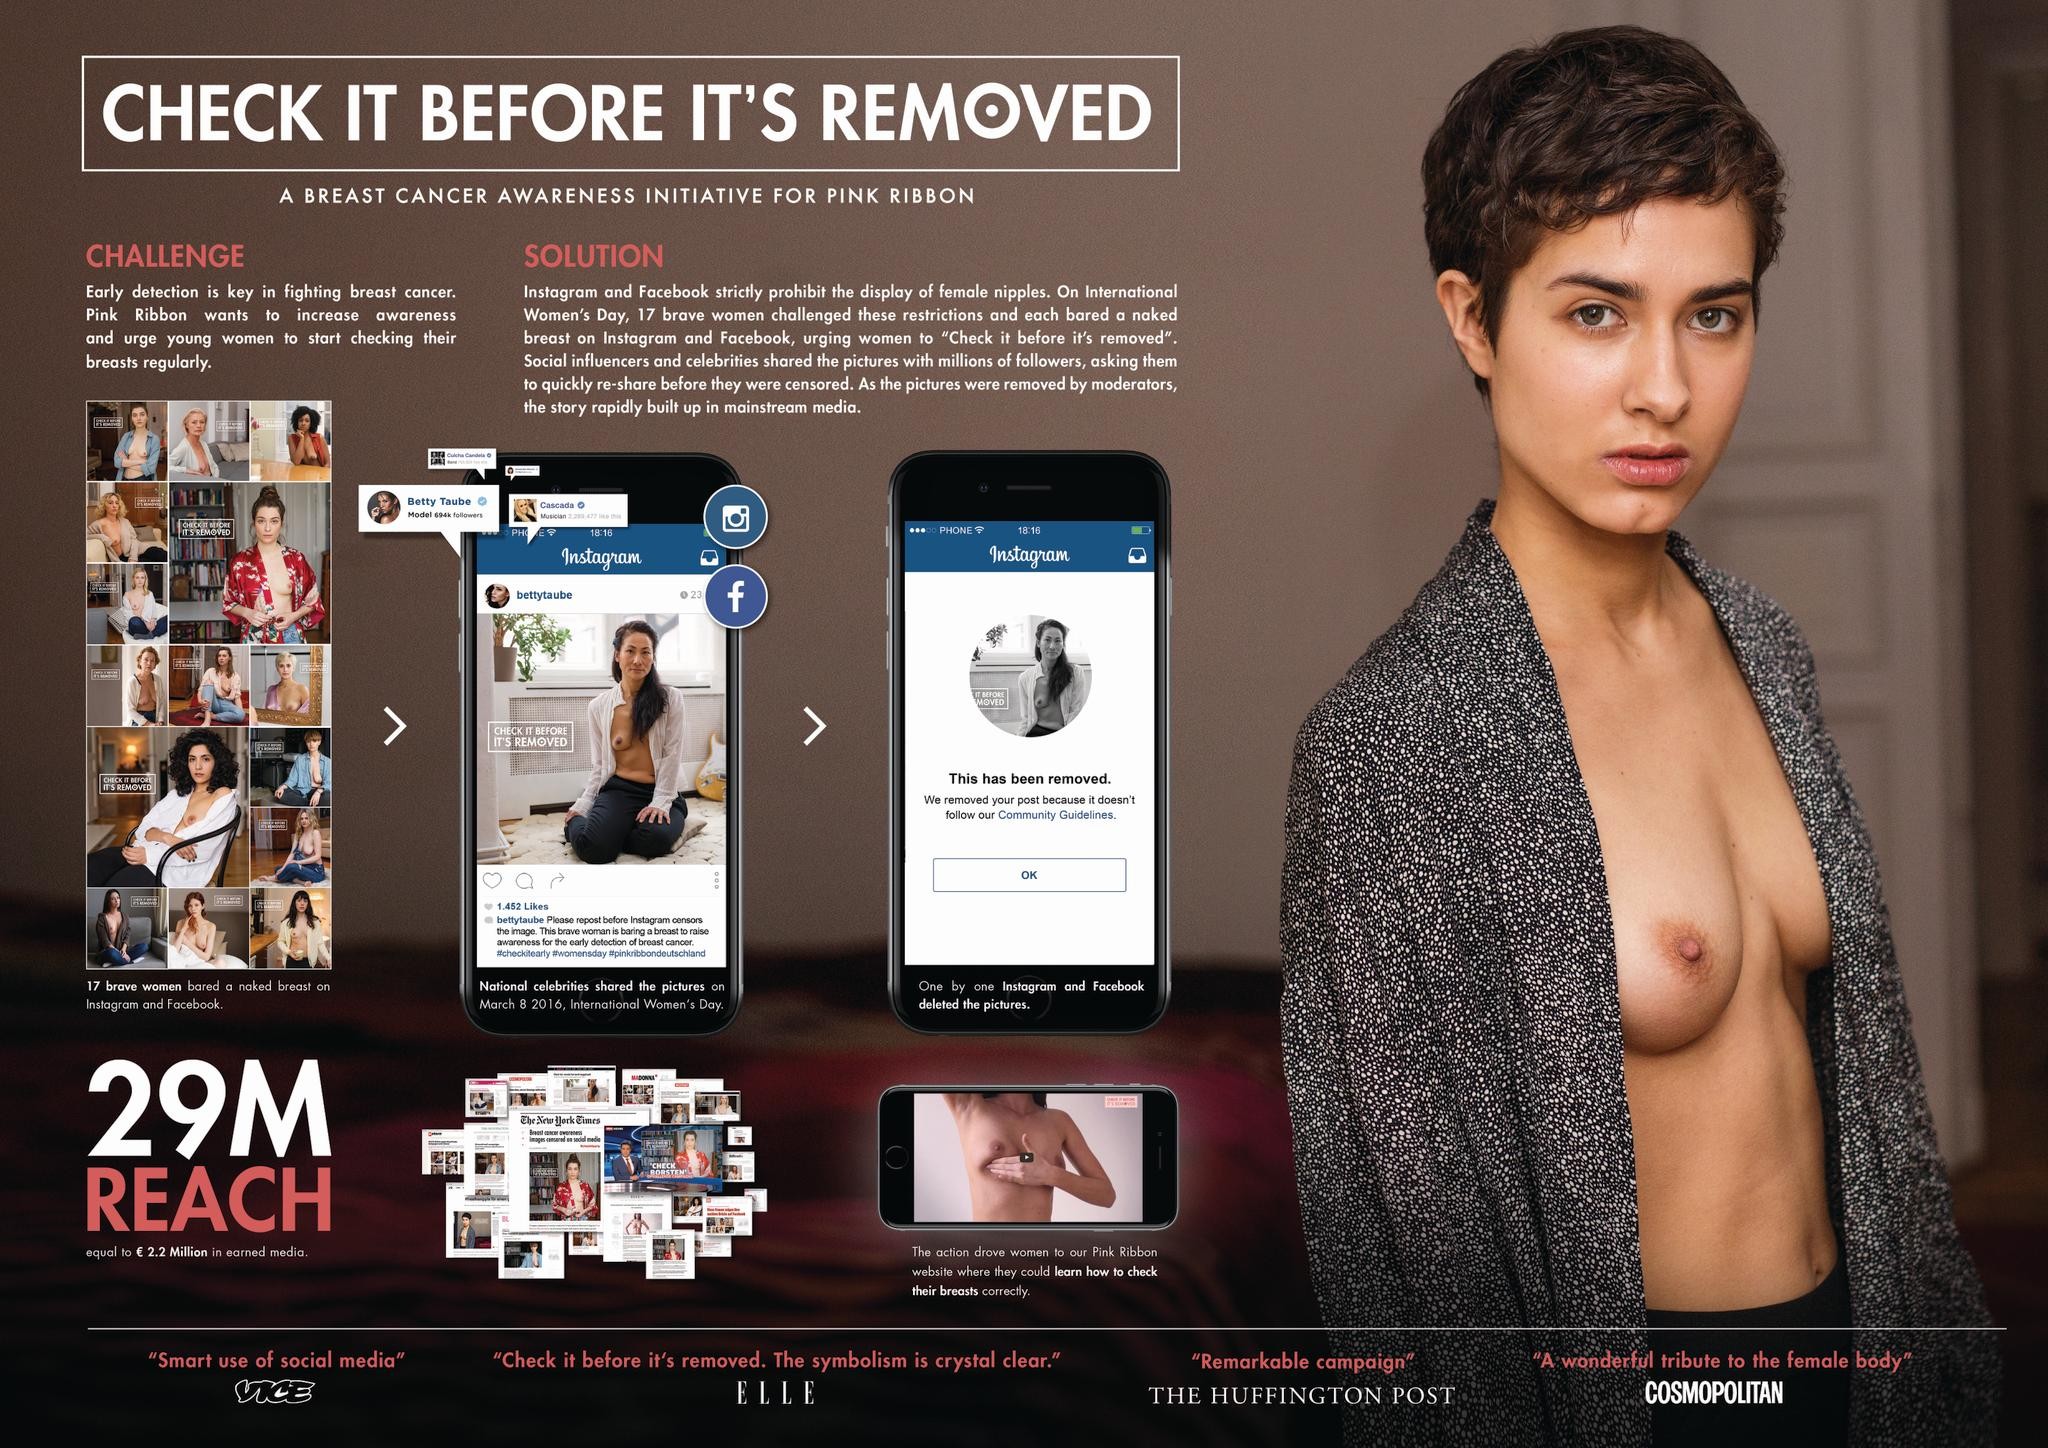 CHECK IT BEFORE IT'S REMOVED: NAKED BREASTS ON FACEBOOK AGAINST BREAST CANCER.